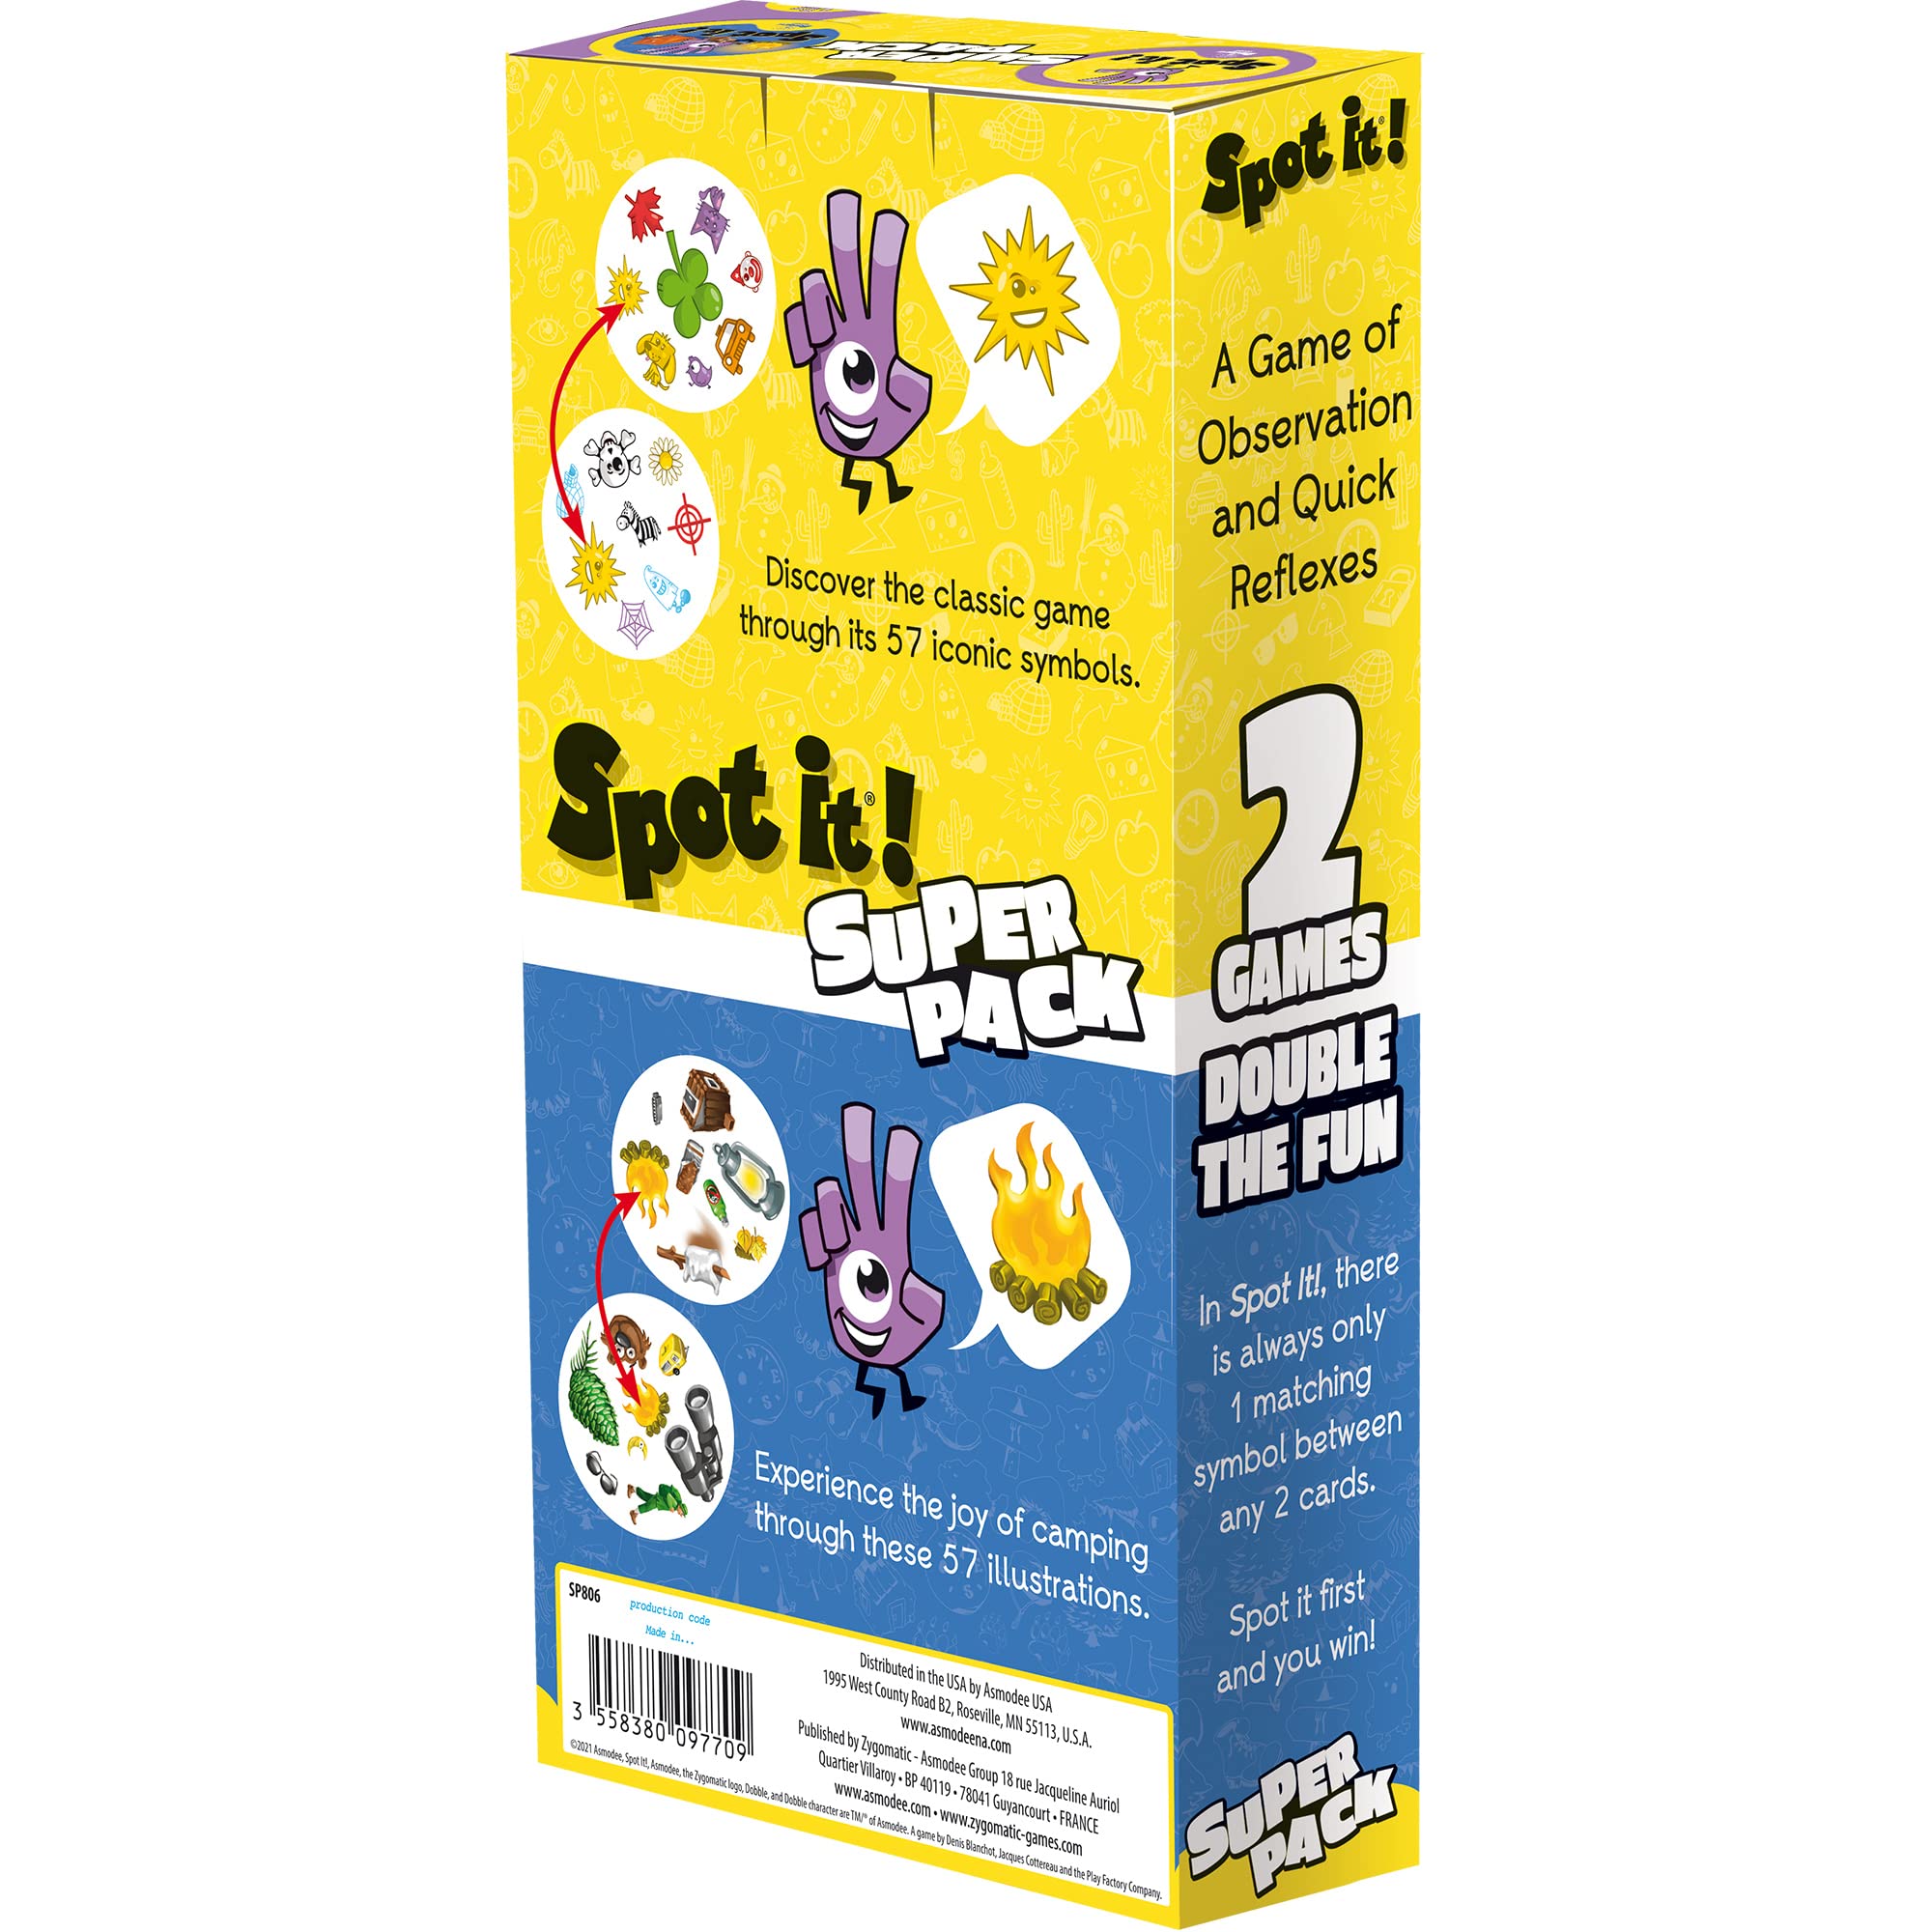 Spot It! Card Game Super Pack Bundle | Includes Spot It! Classic and Camping | Fun Visual Game for Kids and Adults | Age 6+ | 2-5 Players | Average Playtime 15 Minutes | Made by Zygomatic